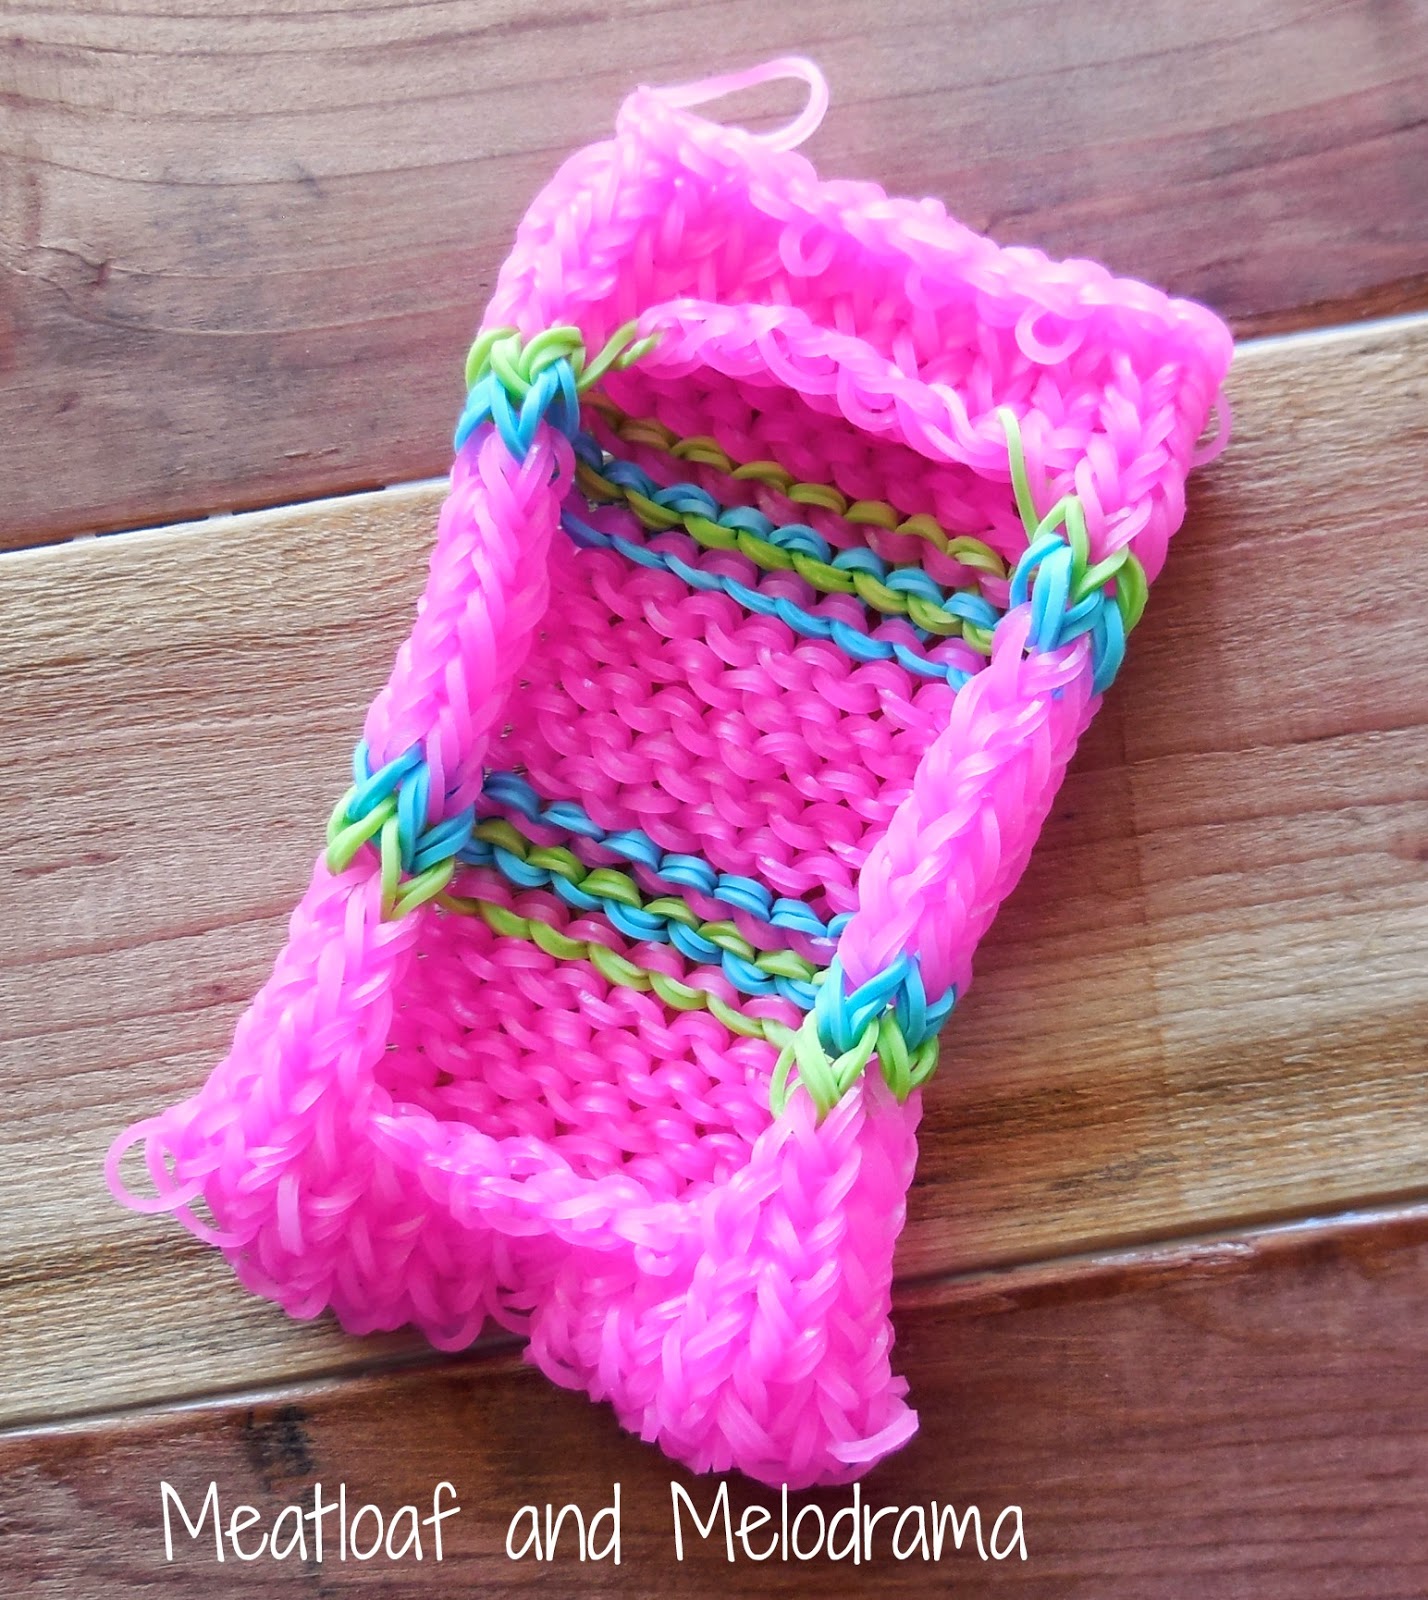 pink iphone 5 case made from rainbow loom bands